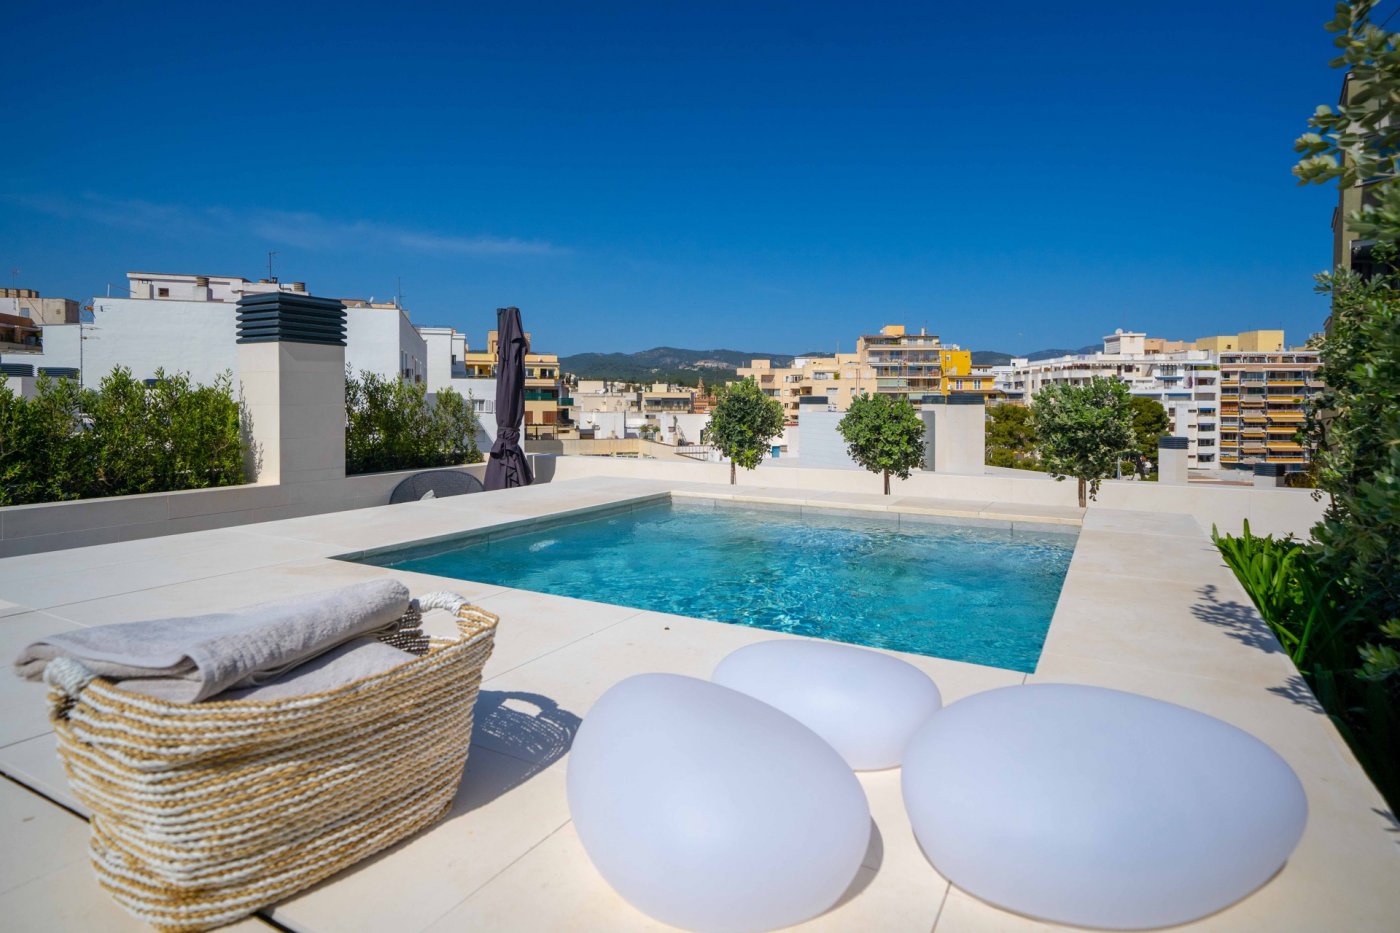 Modern south-facing penthouse in central Palma with rooftop terrace private pool and sea views.